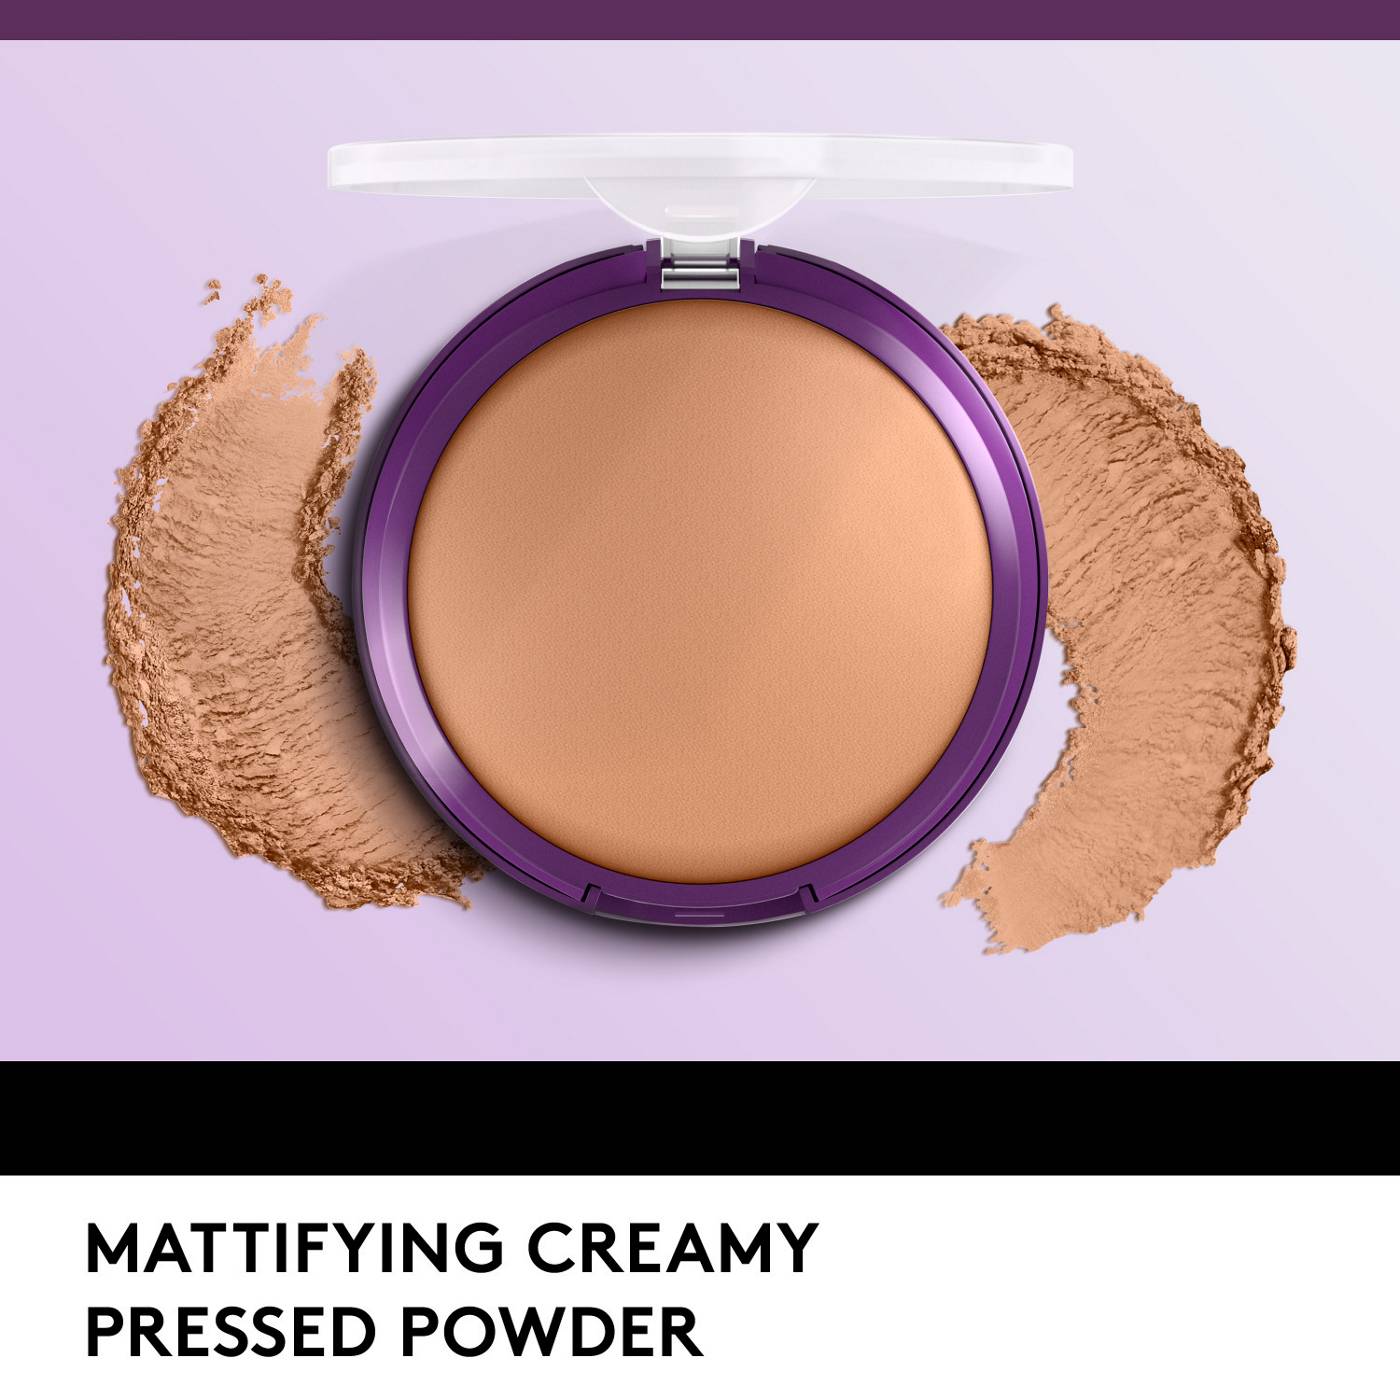 Covergirl Simply Ageless Pressed Powder 225 Buff Beige; image 8 of 13